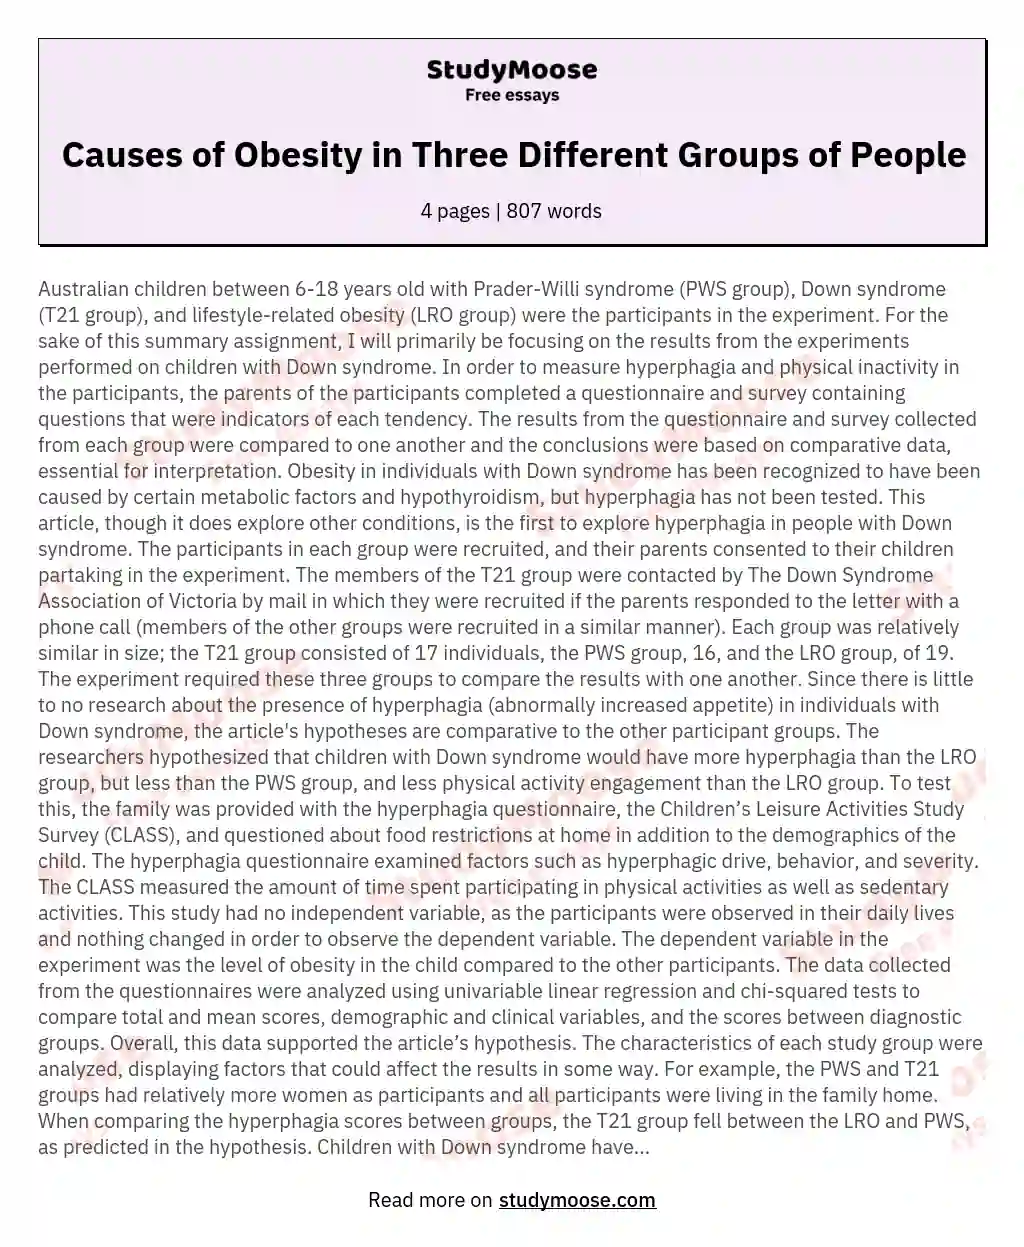 Causes of Obesity in Three Different Groups of People essay